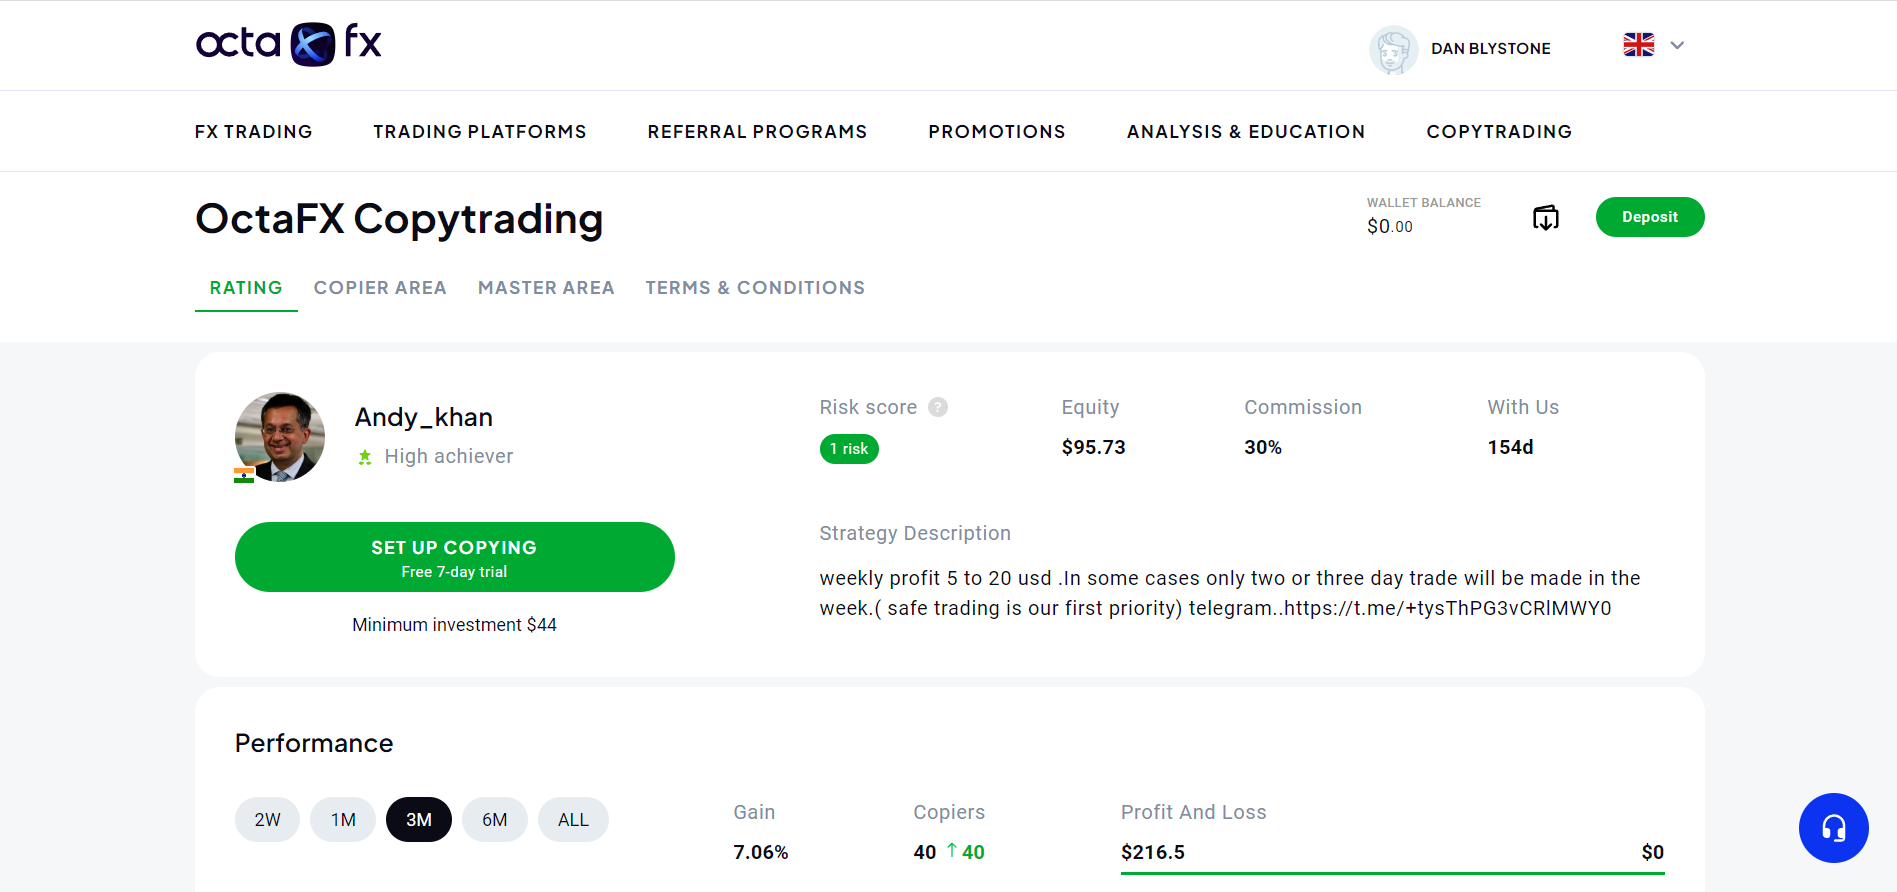 OctaFX Copy Trading Rating Page